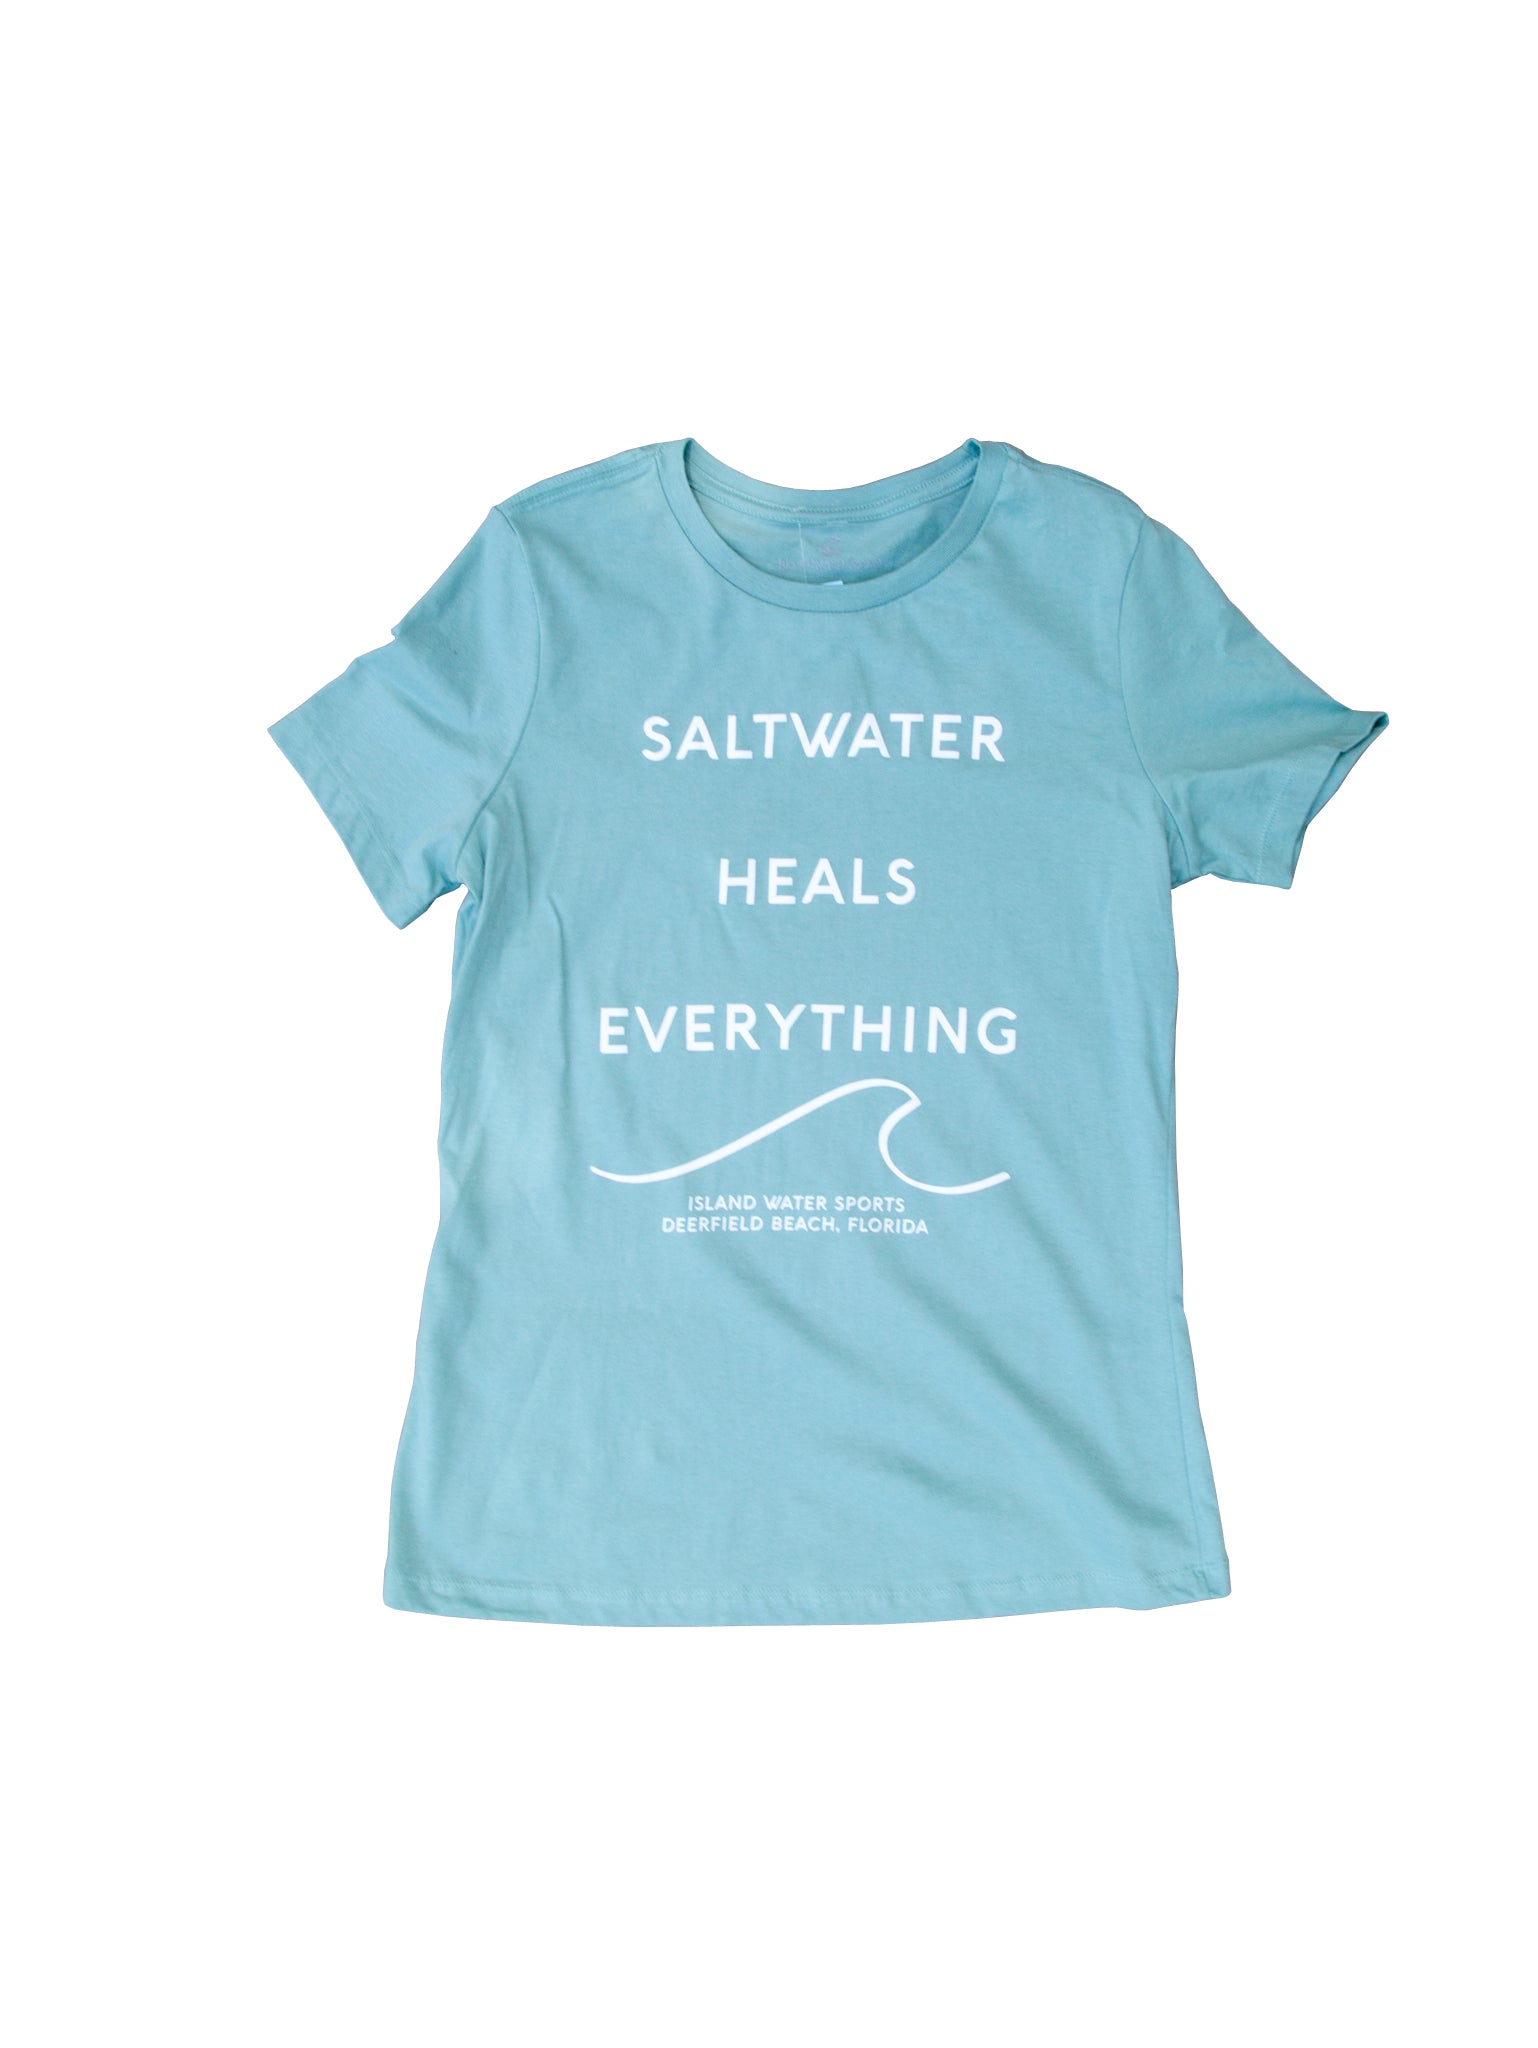 IWS Saltwater Heals Everything Relaxed S/S Tee DustyBlue-White L